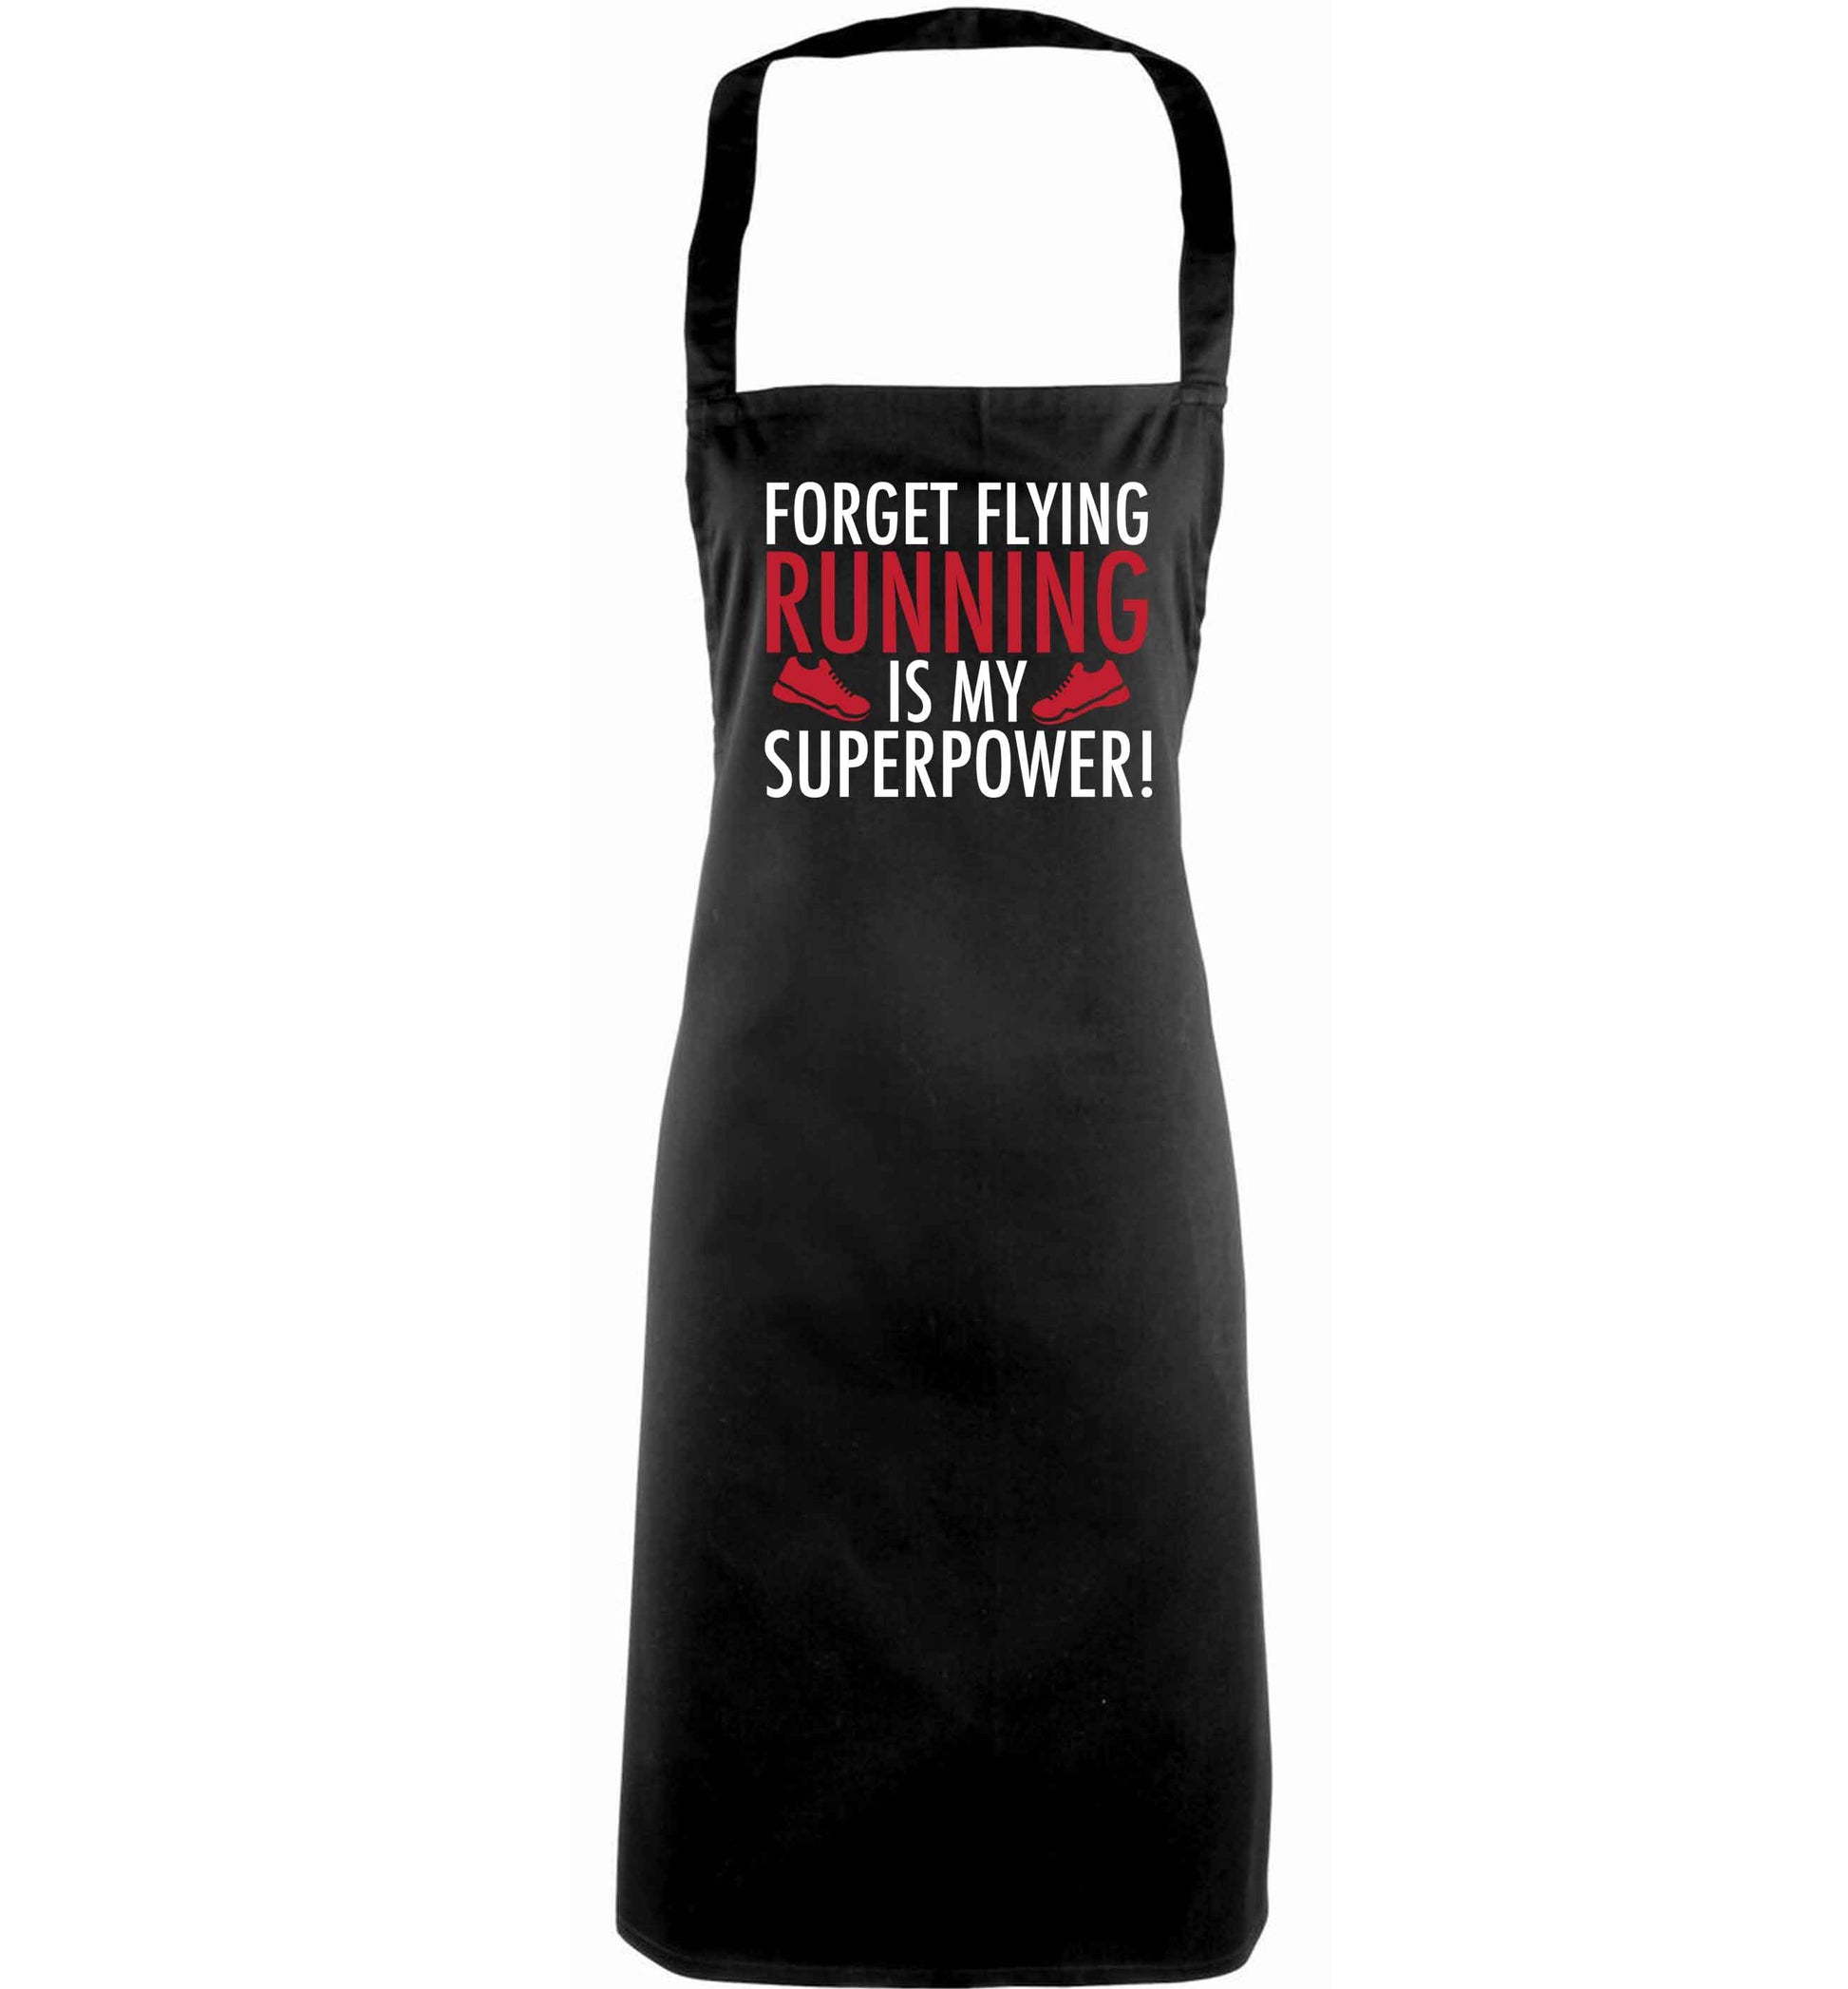 Crazy running dude adults black apron